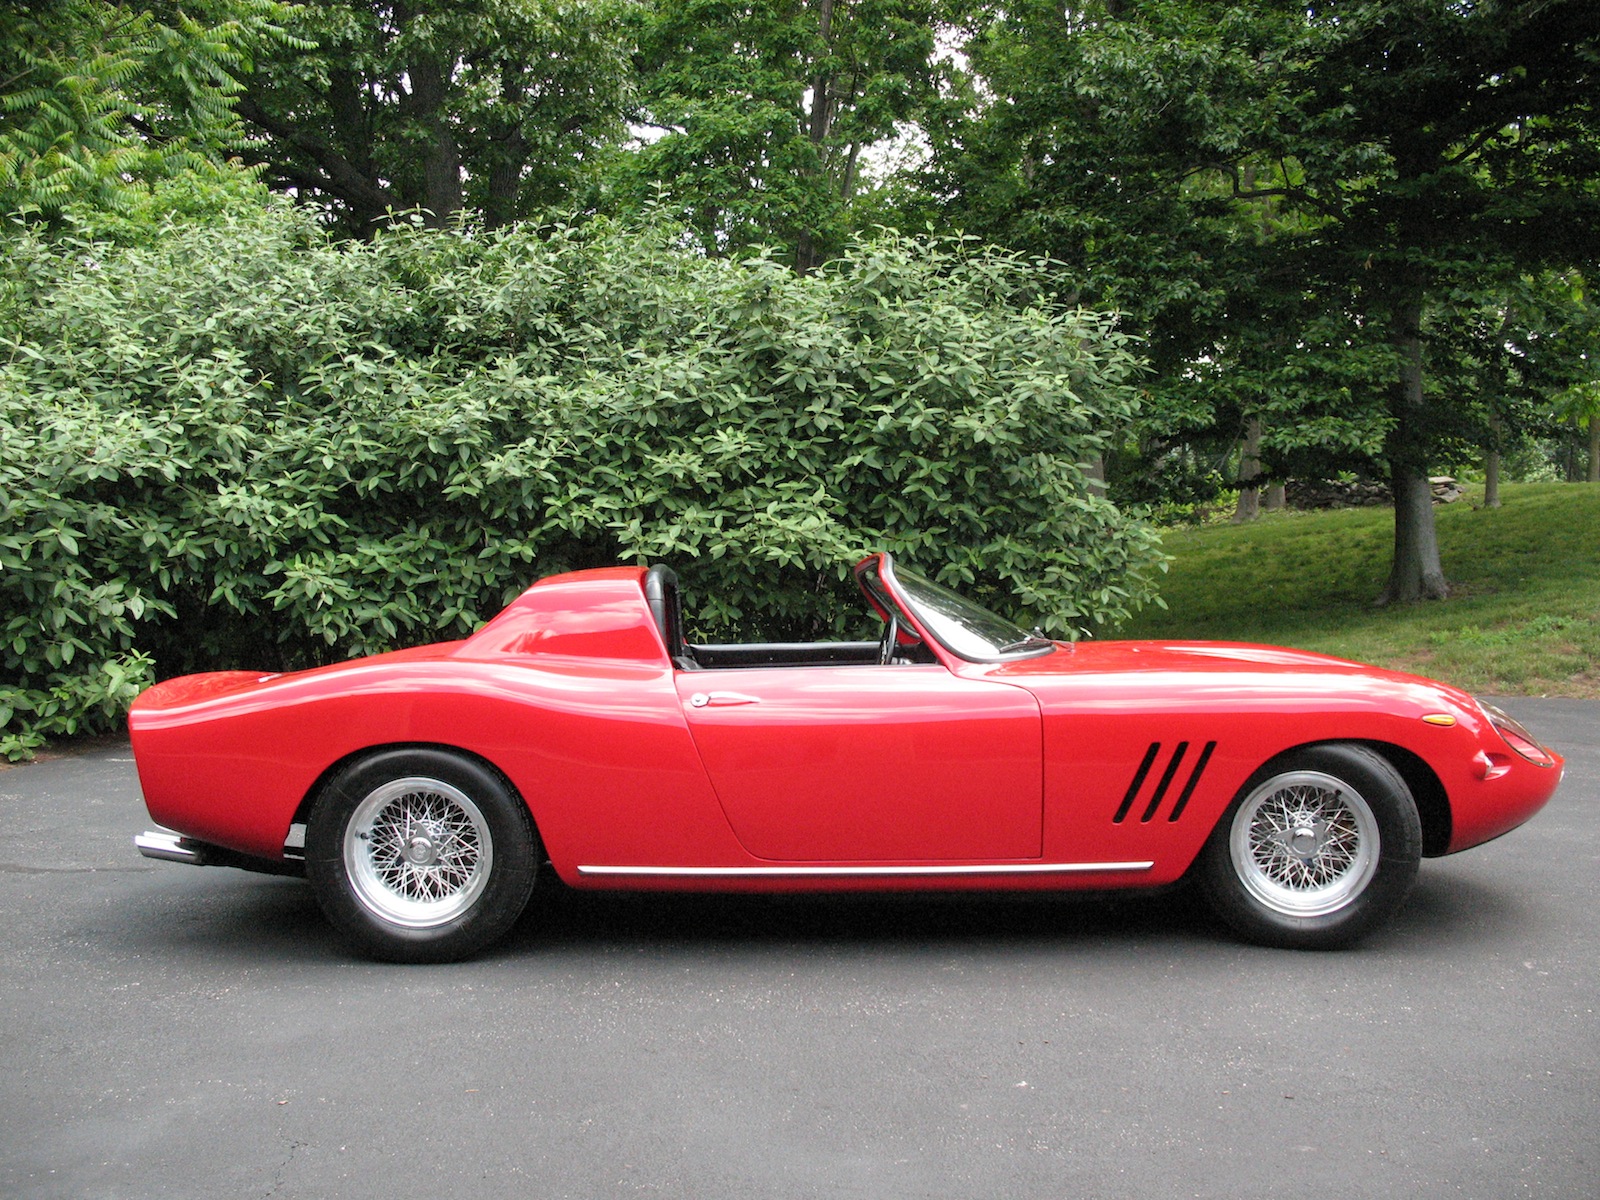 Another Ferrari NART Spider - This One Made Before The Famous 275 GTB/4 NART Spiders